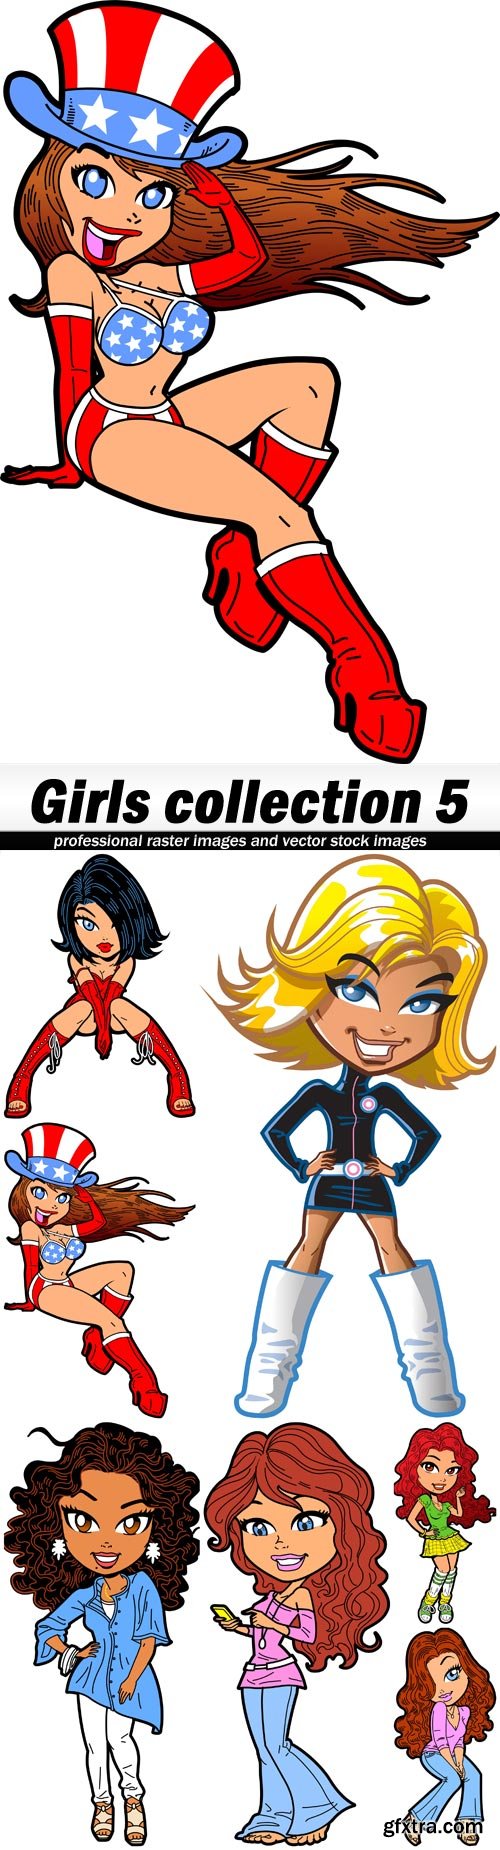 Girls collection 5 - 7 EPS